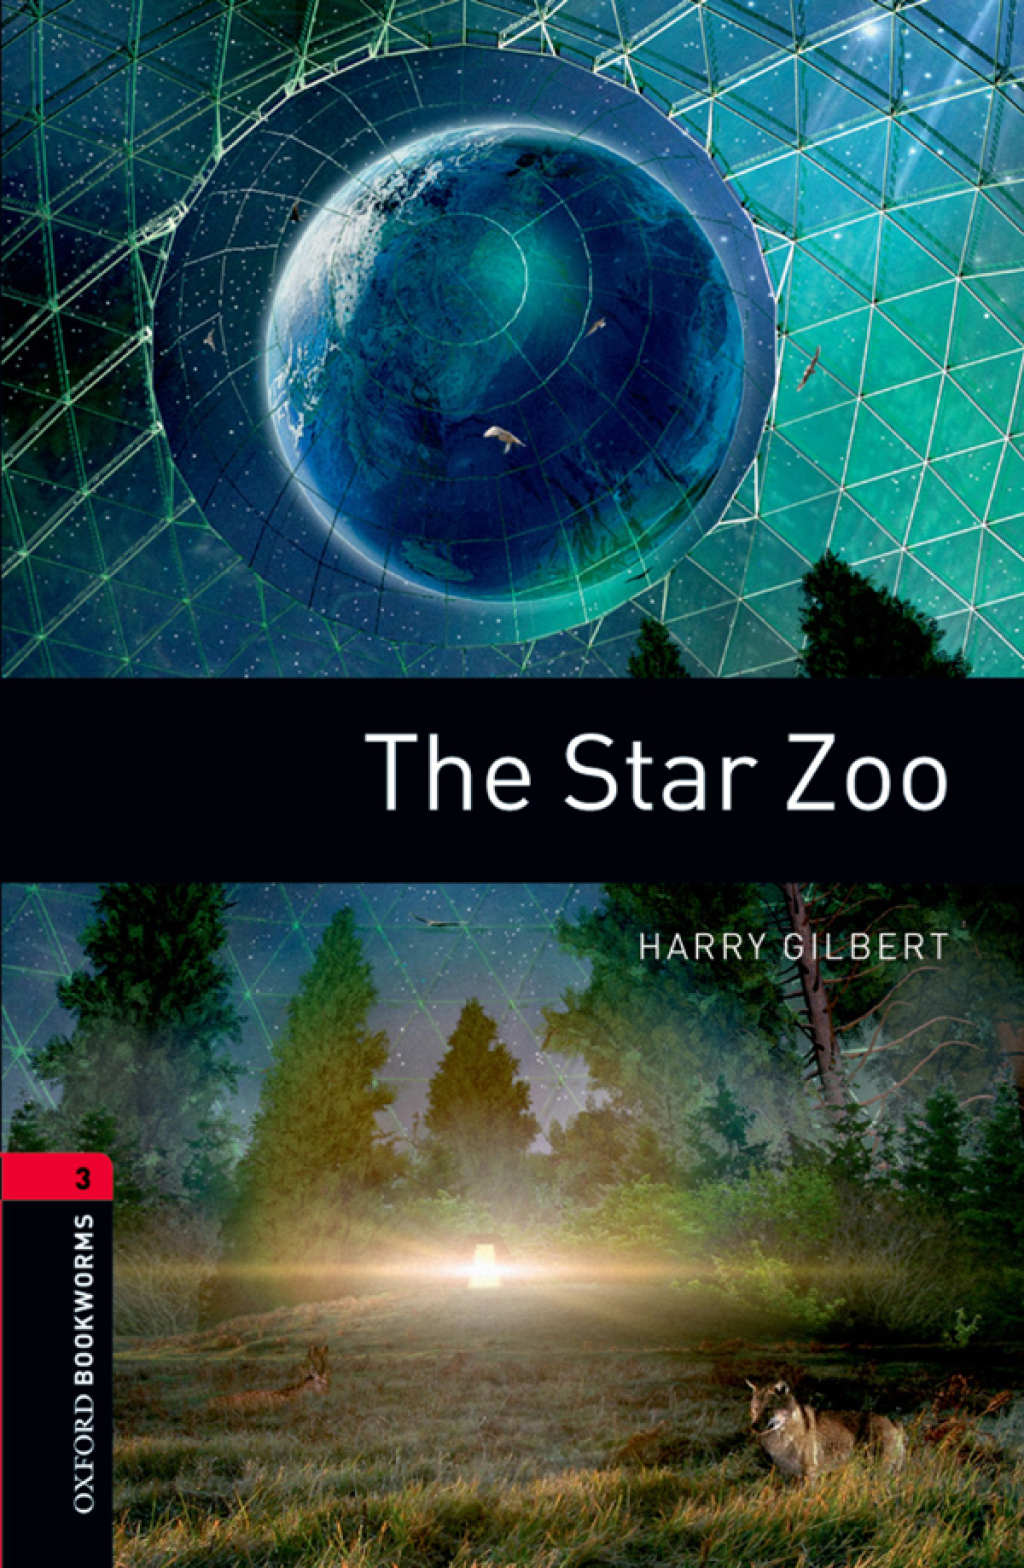 The Star Zoo Level 3 Oxford Bookworms Library - 3rd Edition (eBook Rental)